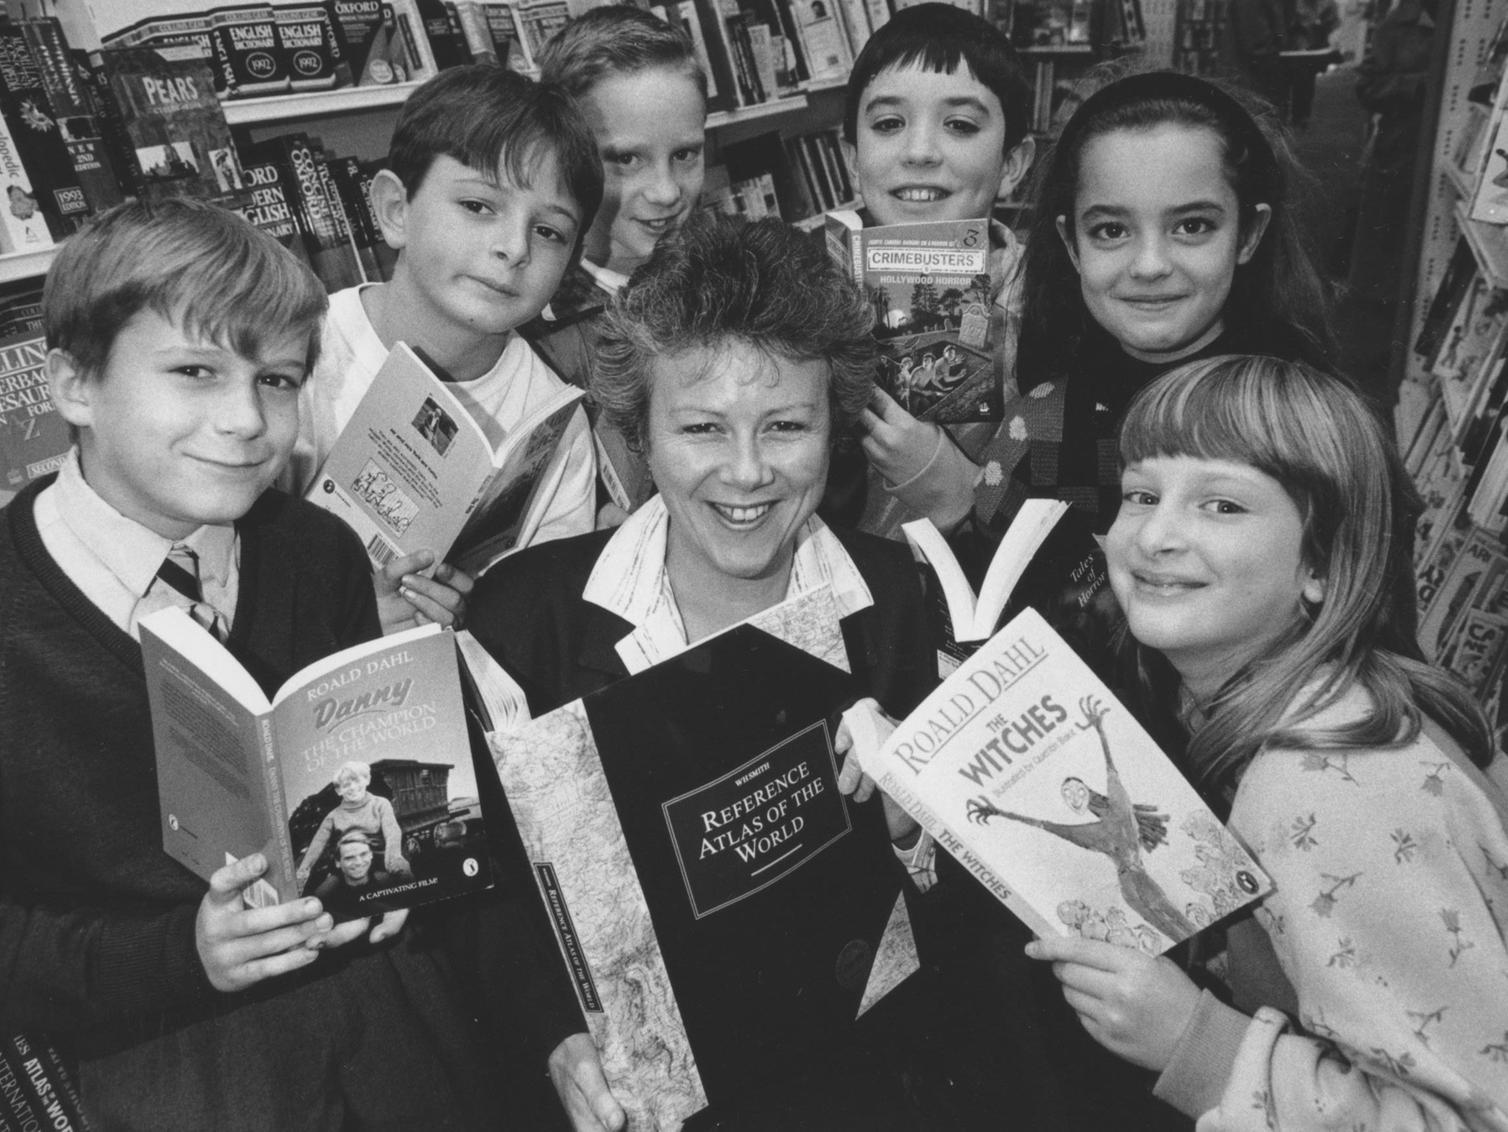 Elaine Beecroft, the book manager at WH Smith, is pictured with six charity readathon pupils from Friarage School in October 1992. From left, Alan Richmond, Elliott Smith, Leroy Smedly, Mark Headland, Claire Ratcloiffe and Claire Ridgway.